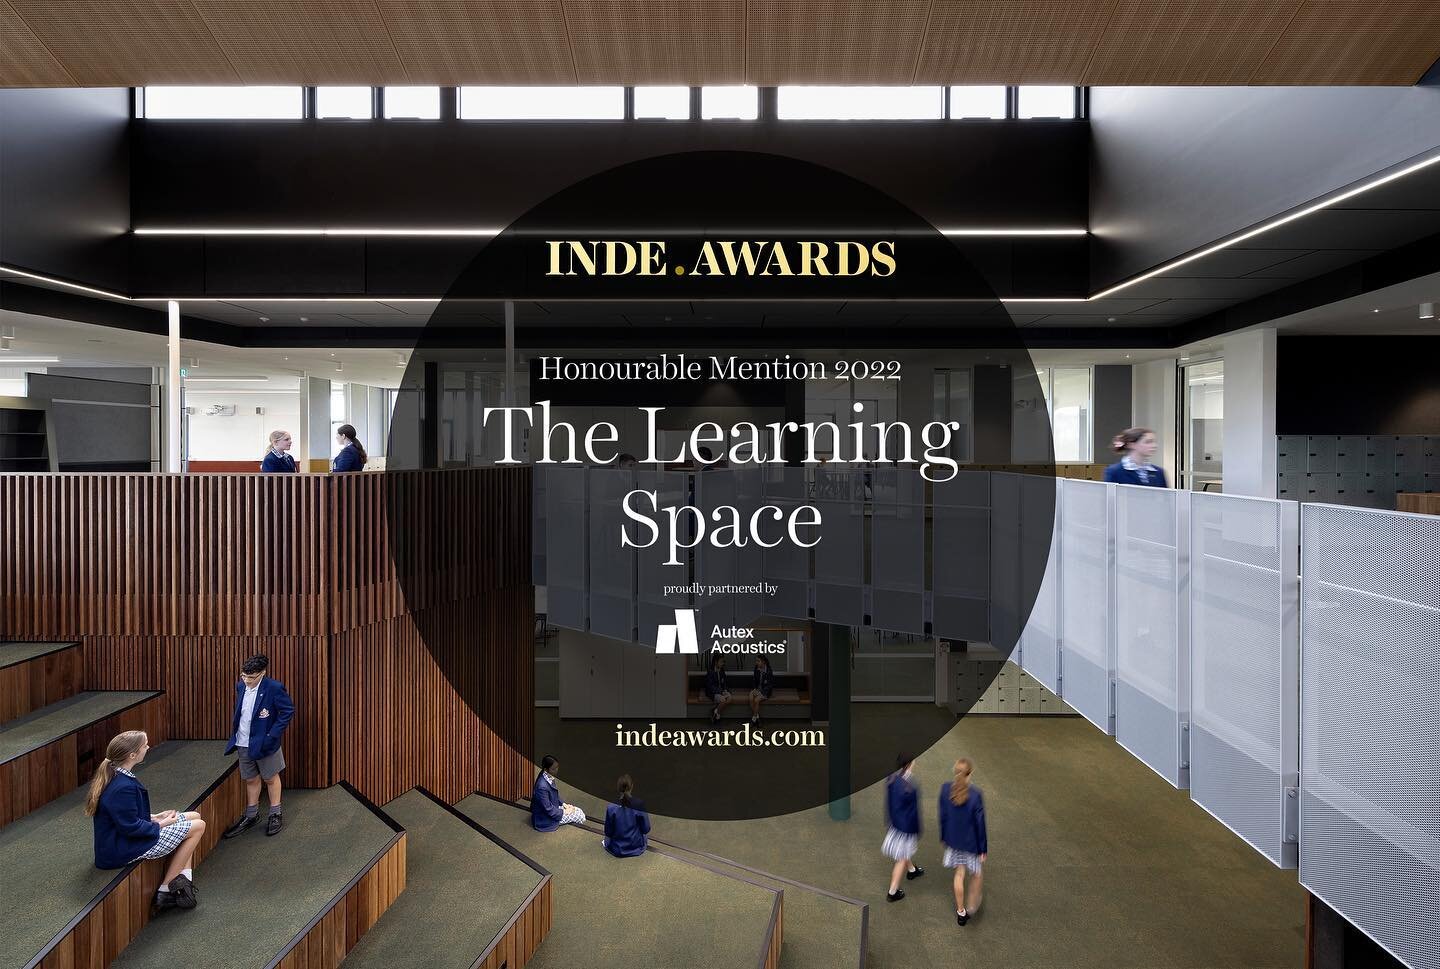 We are thrilled that Overnewton Anglican Community College, Yirramboi Campus &ndash; New Middle School Building has been awarded the Honourable mention at the International INDE. Awards 2022 for &lsquo;The Learning Space&rsquo; Category!

#indeawards